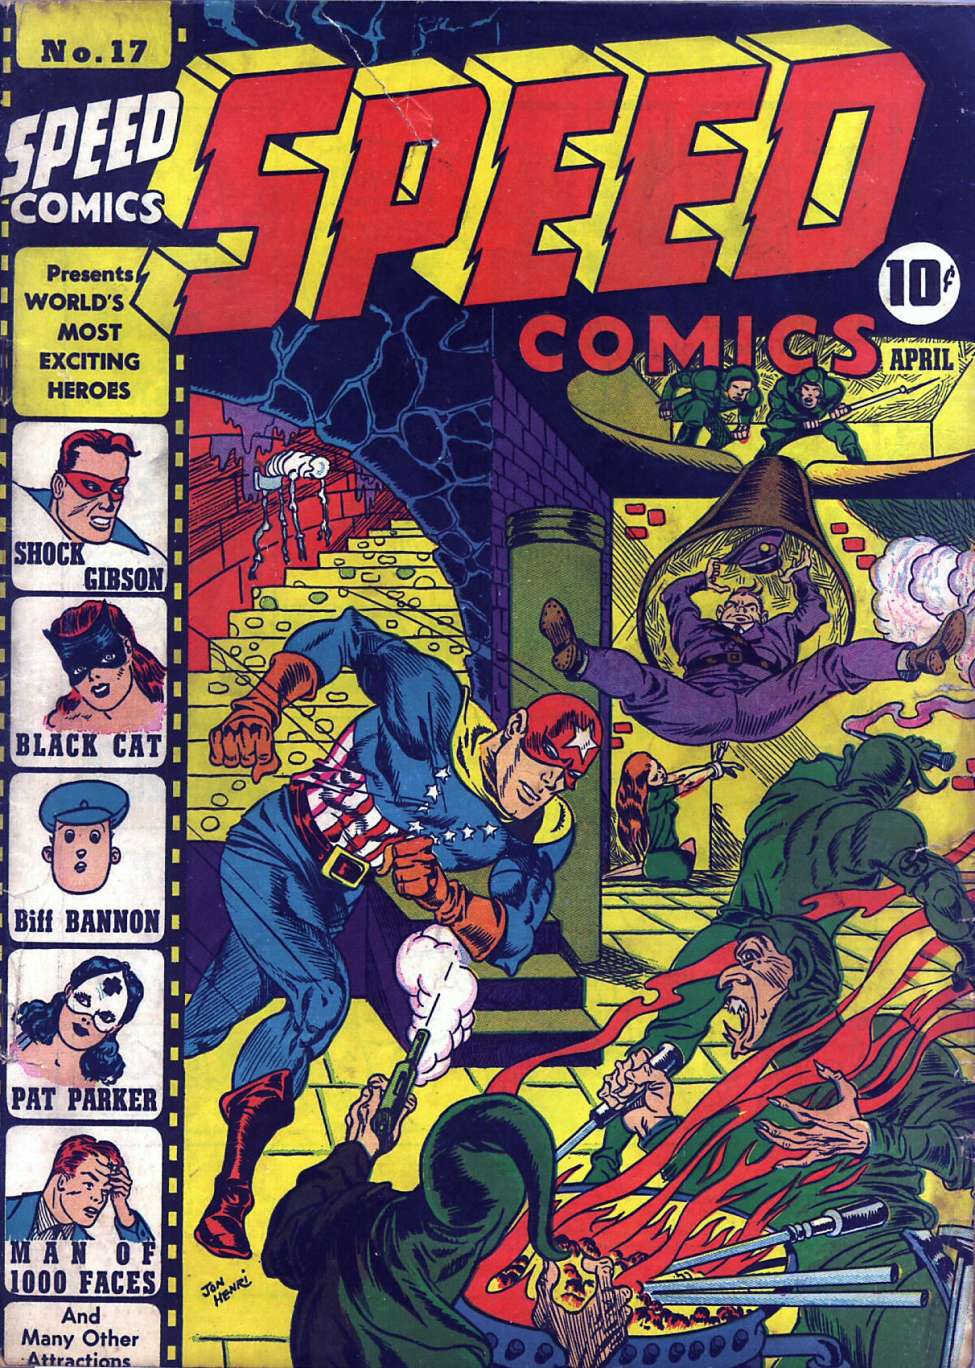 Book Cover For Speed Comics 17